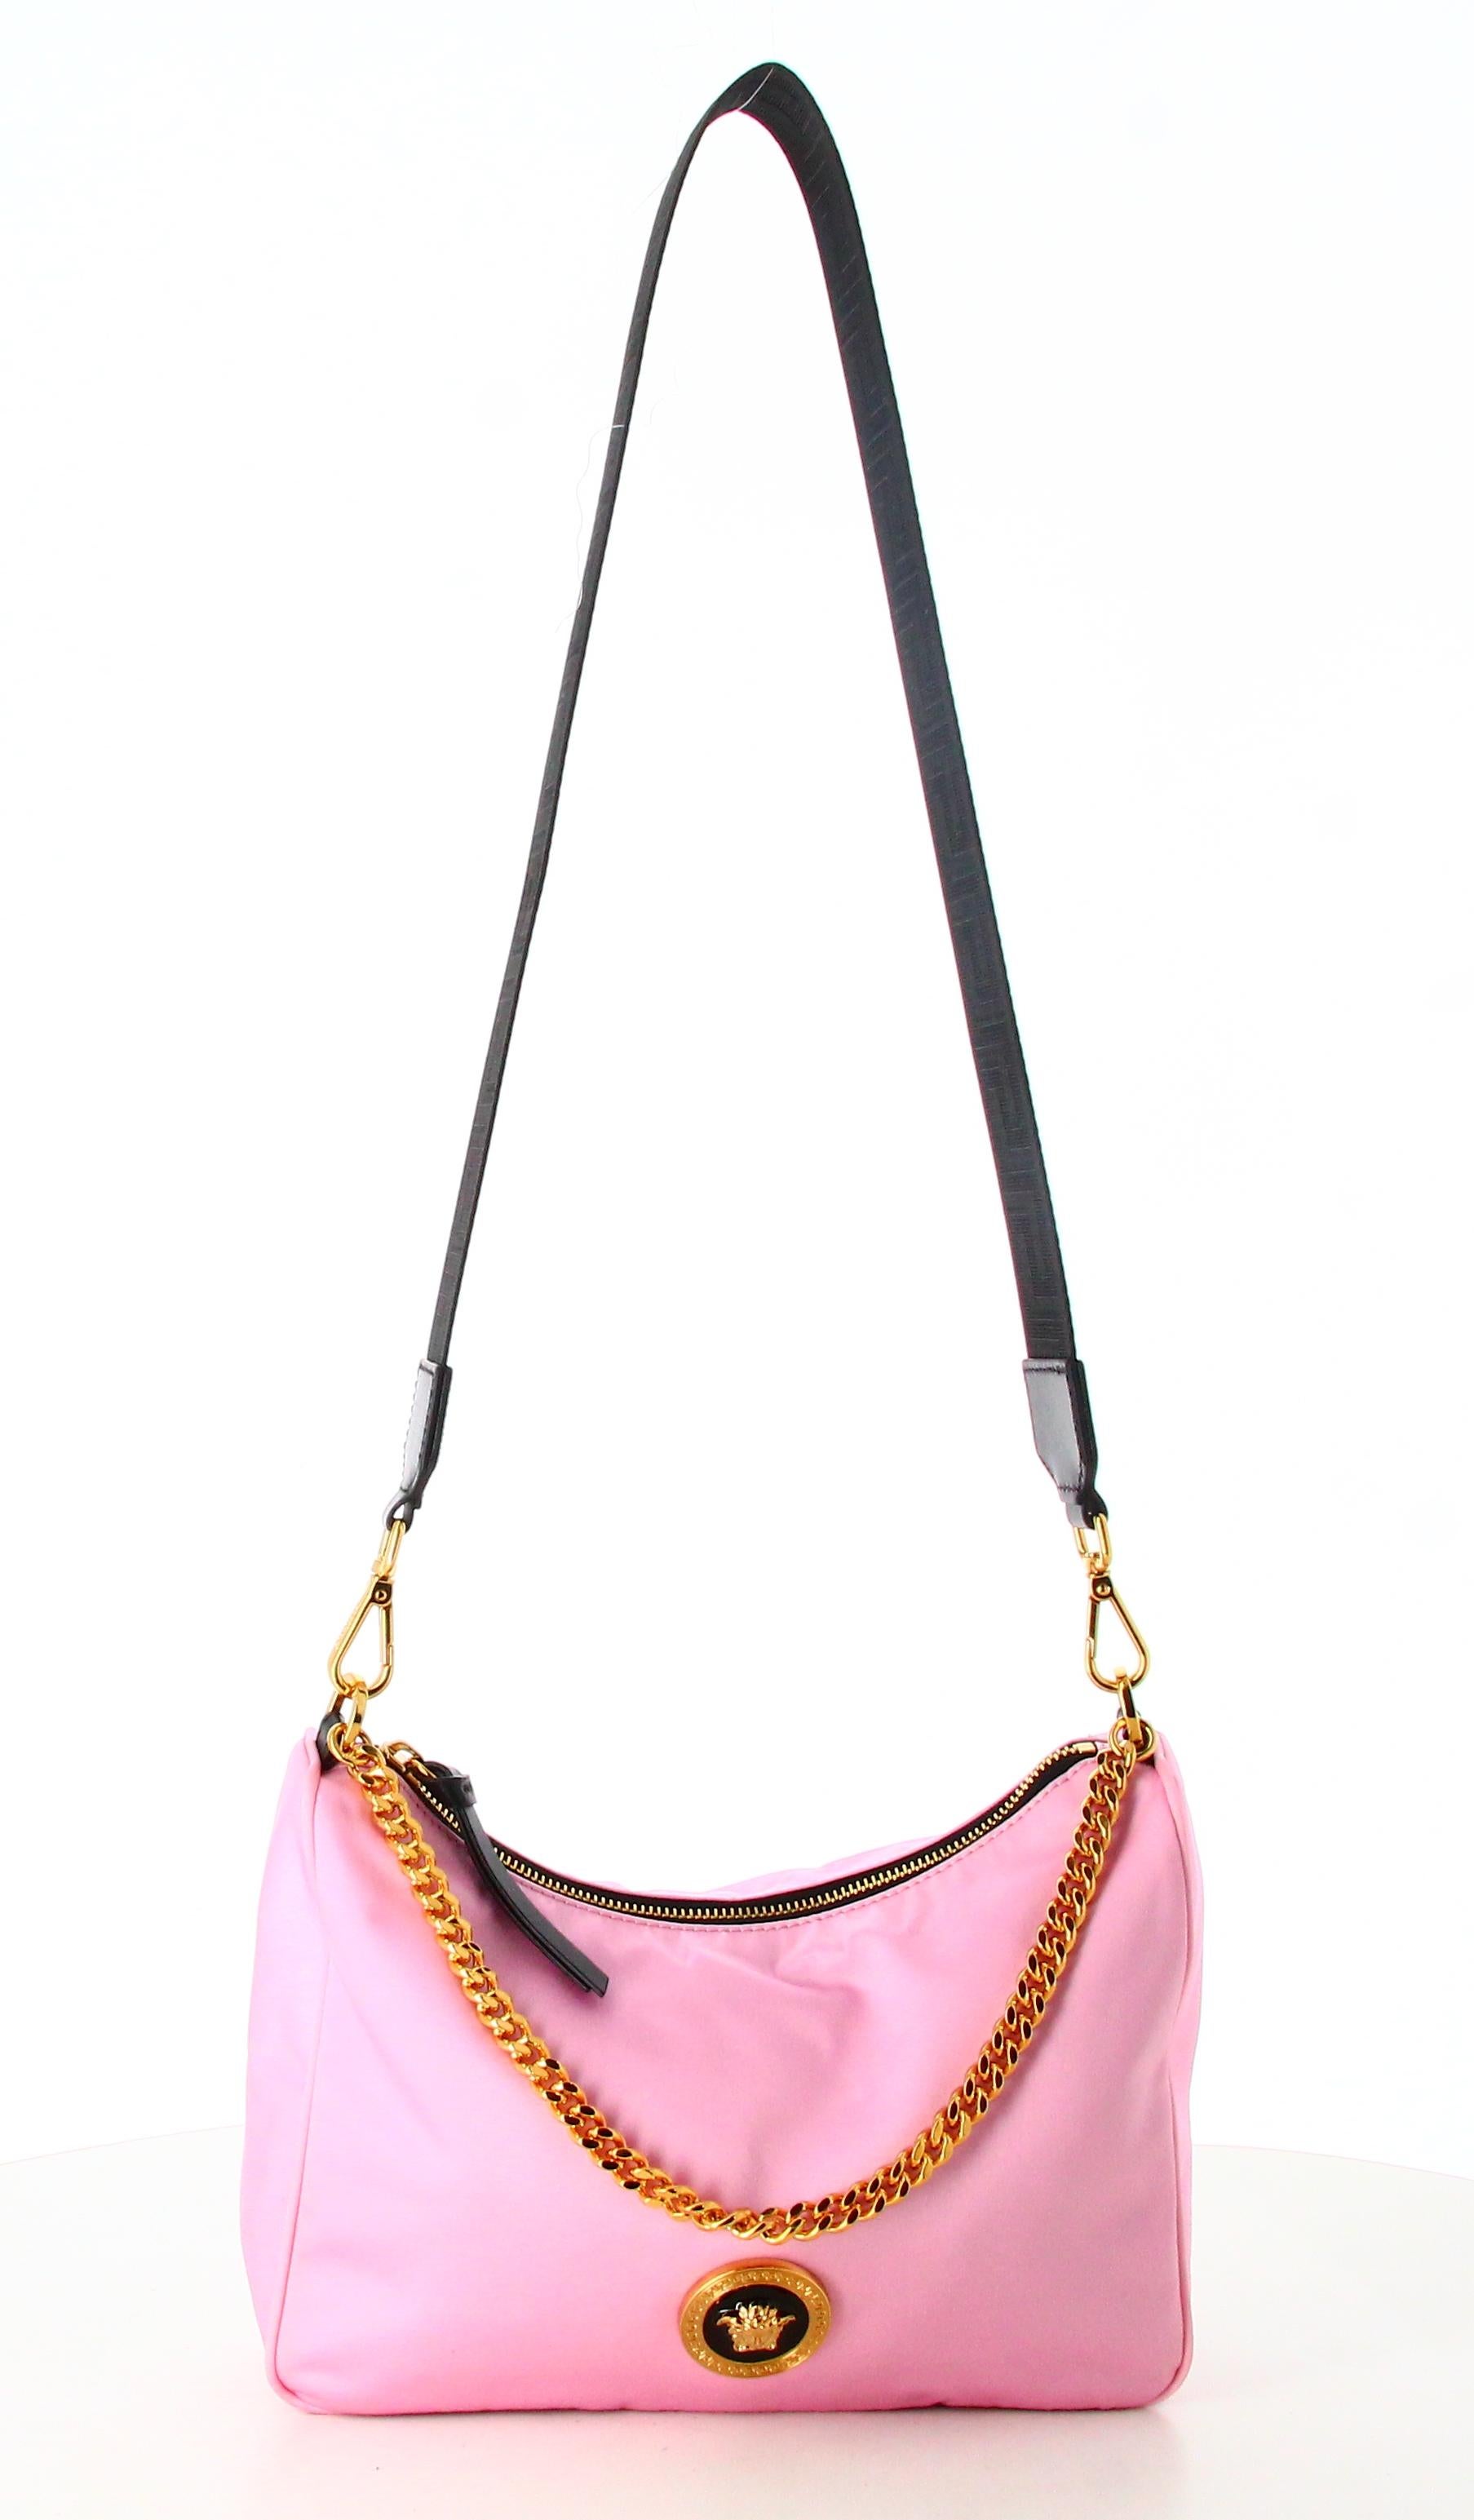 Versace Pink Nylon Shoulder Bag

- Very good condition. Shows very slight signs of wear over time. 
- Versace shoulder bag 
- material : Nyon 
- Colour : Pink and golden 
- Golden and black Versace logo 
- Black fabric shoulder strap plus golden